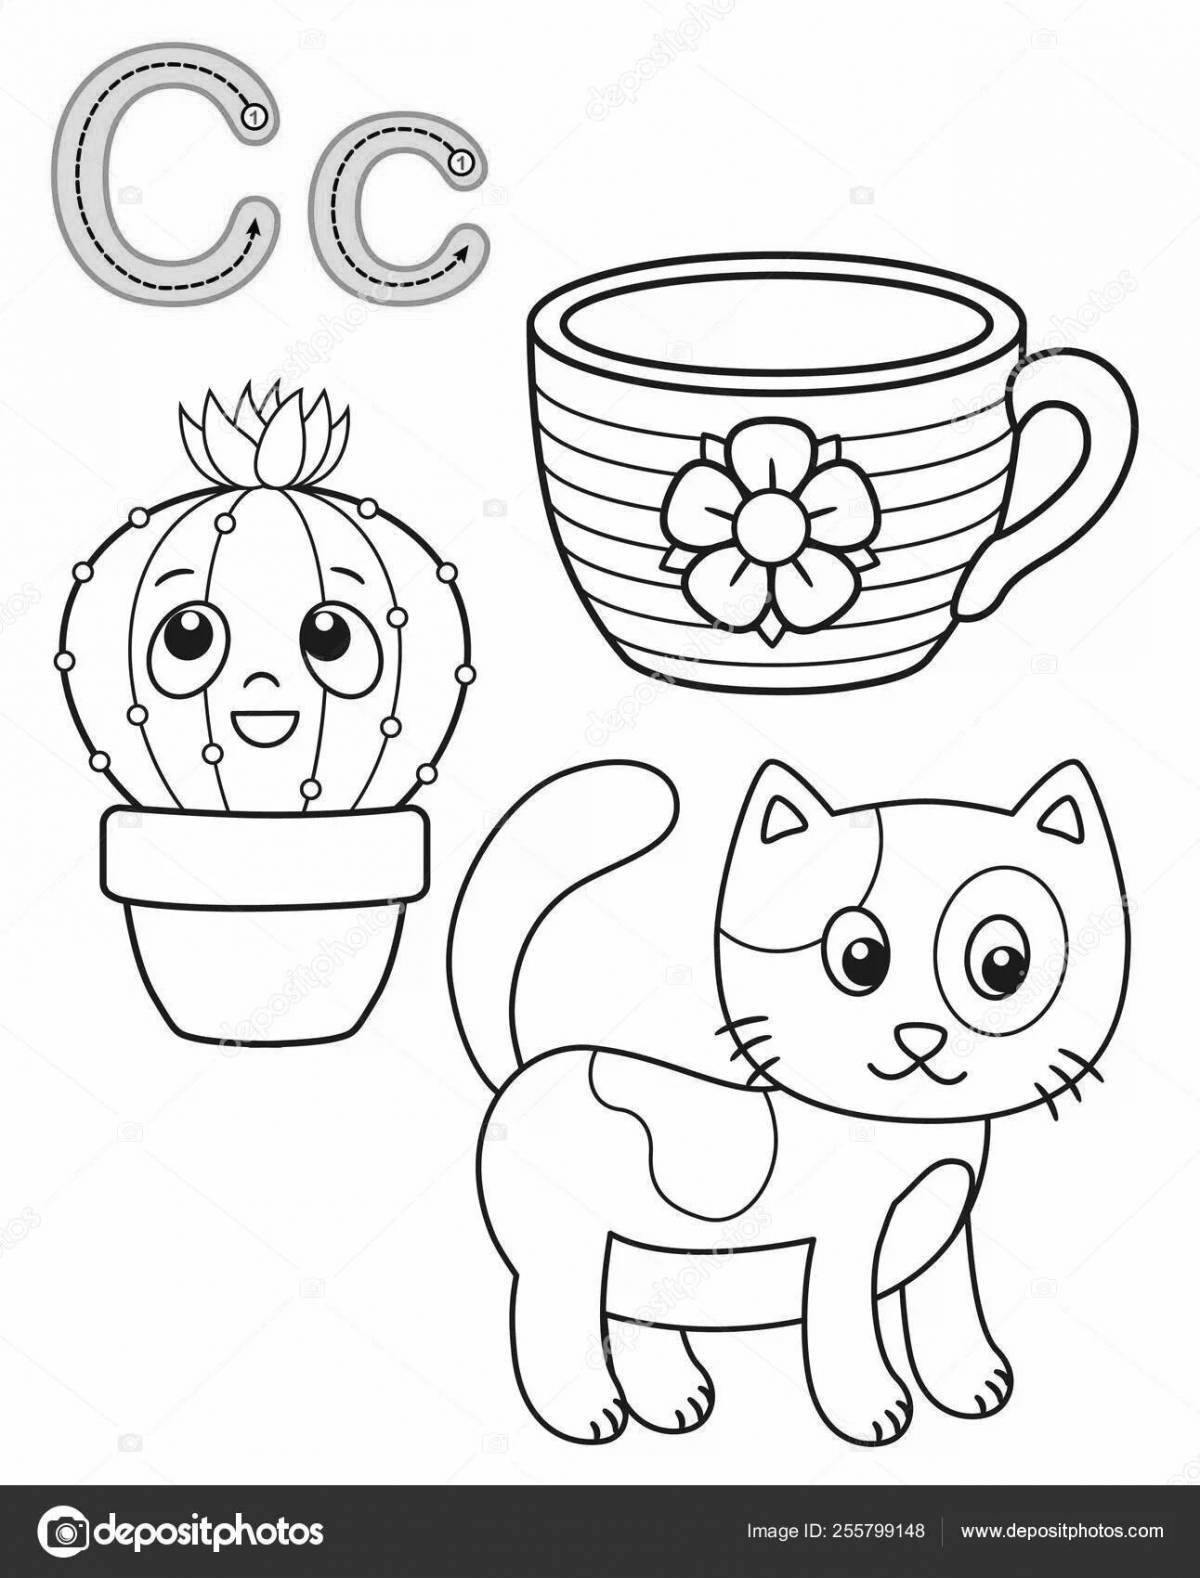 Coloring page adorable cat in a mug